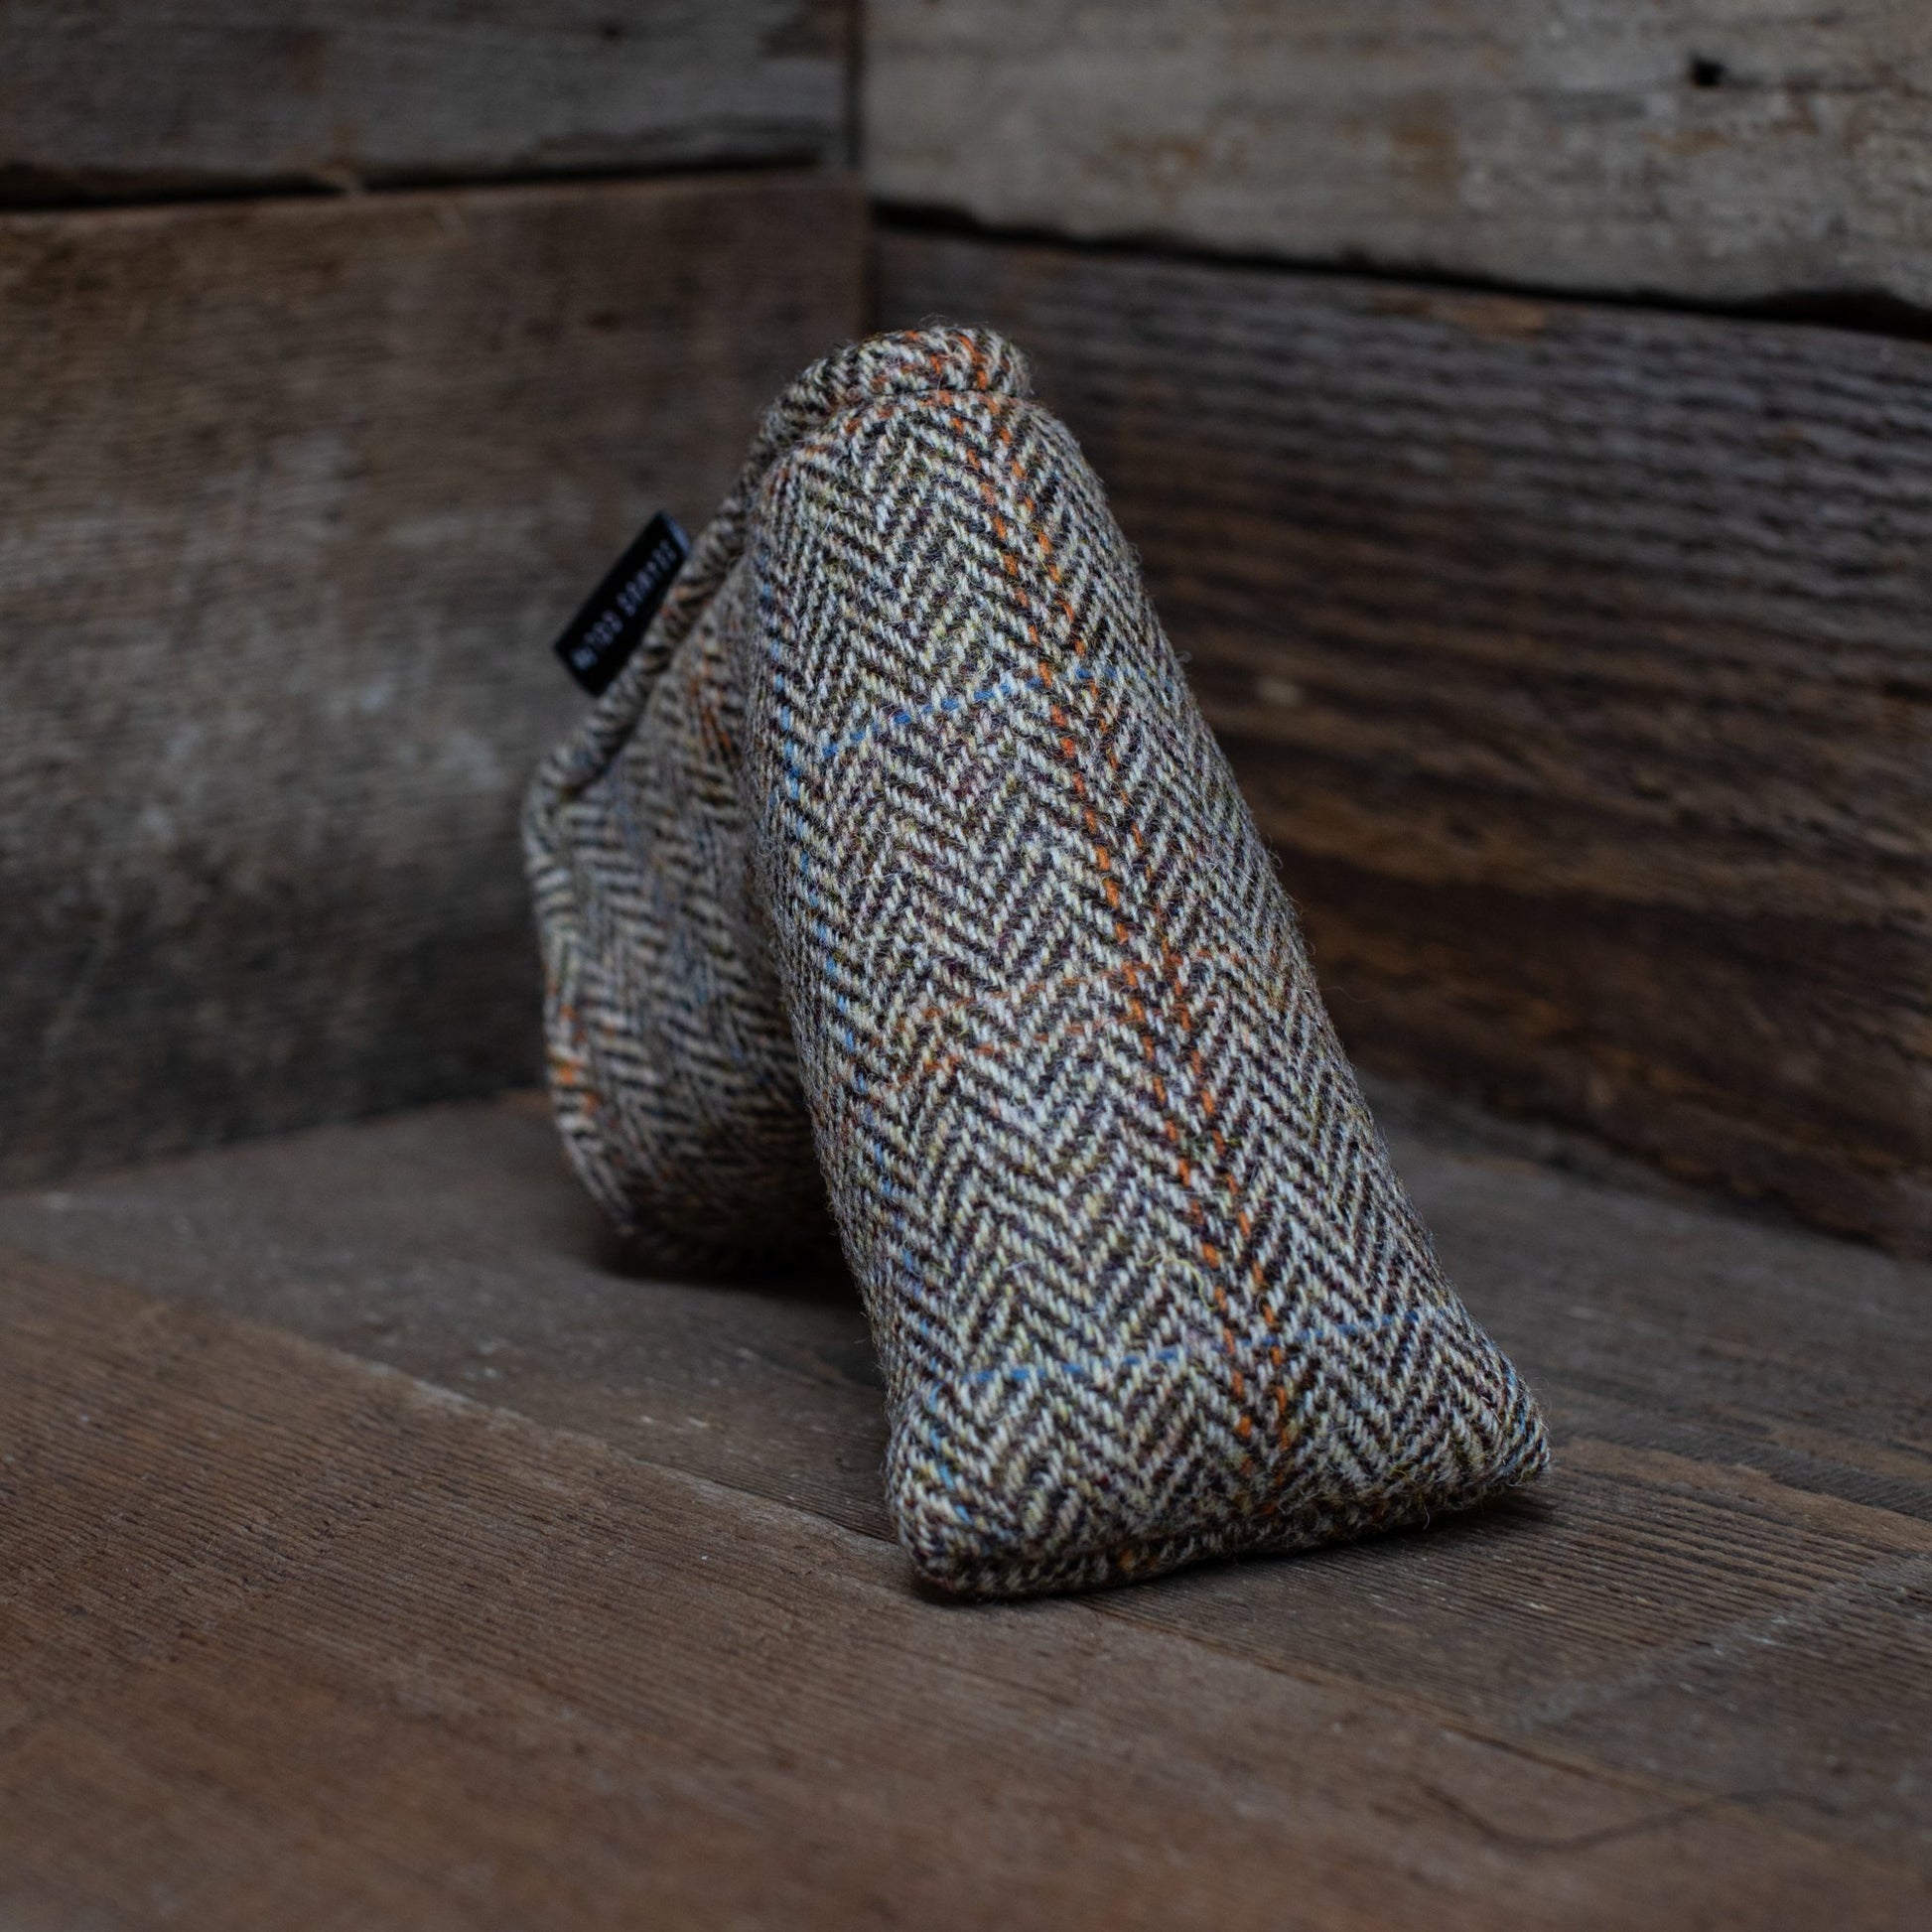 Seamus Golf - Blade Putter Head Cover made from Glen Plaid Harris Tweed Wool with Magnet Closure front view